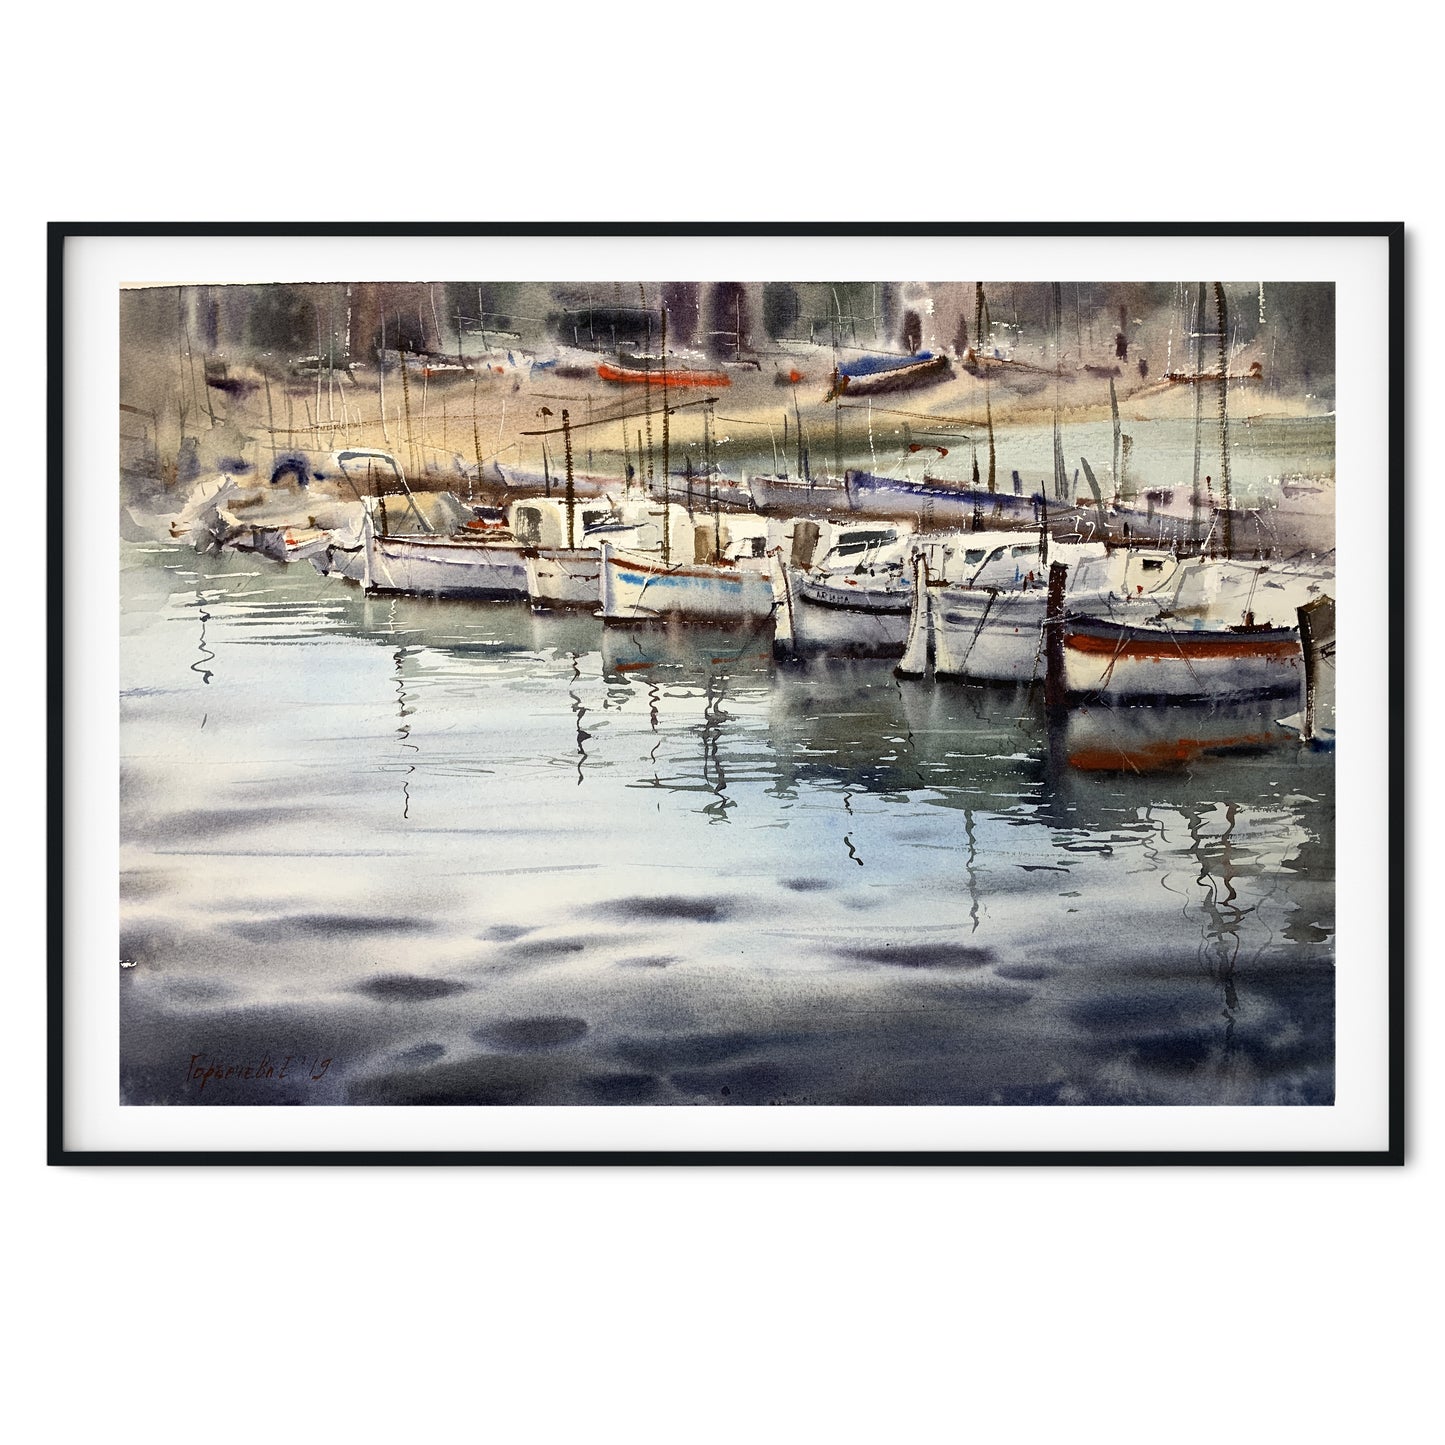 Original Painting Watercolor Artwork - Boats at the pier #2 - 22x15 in